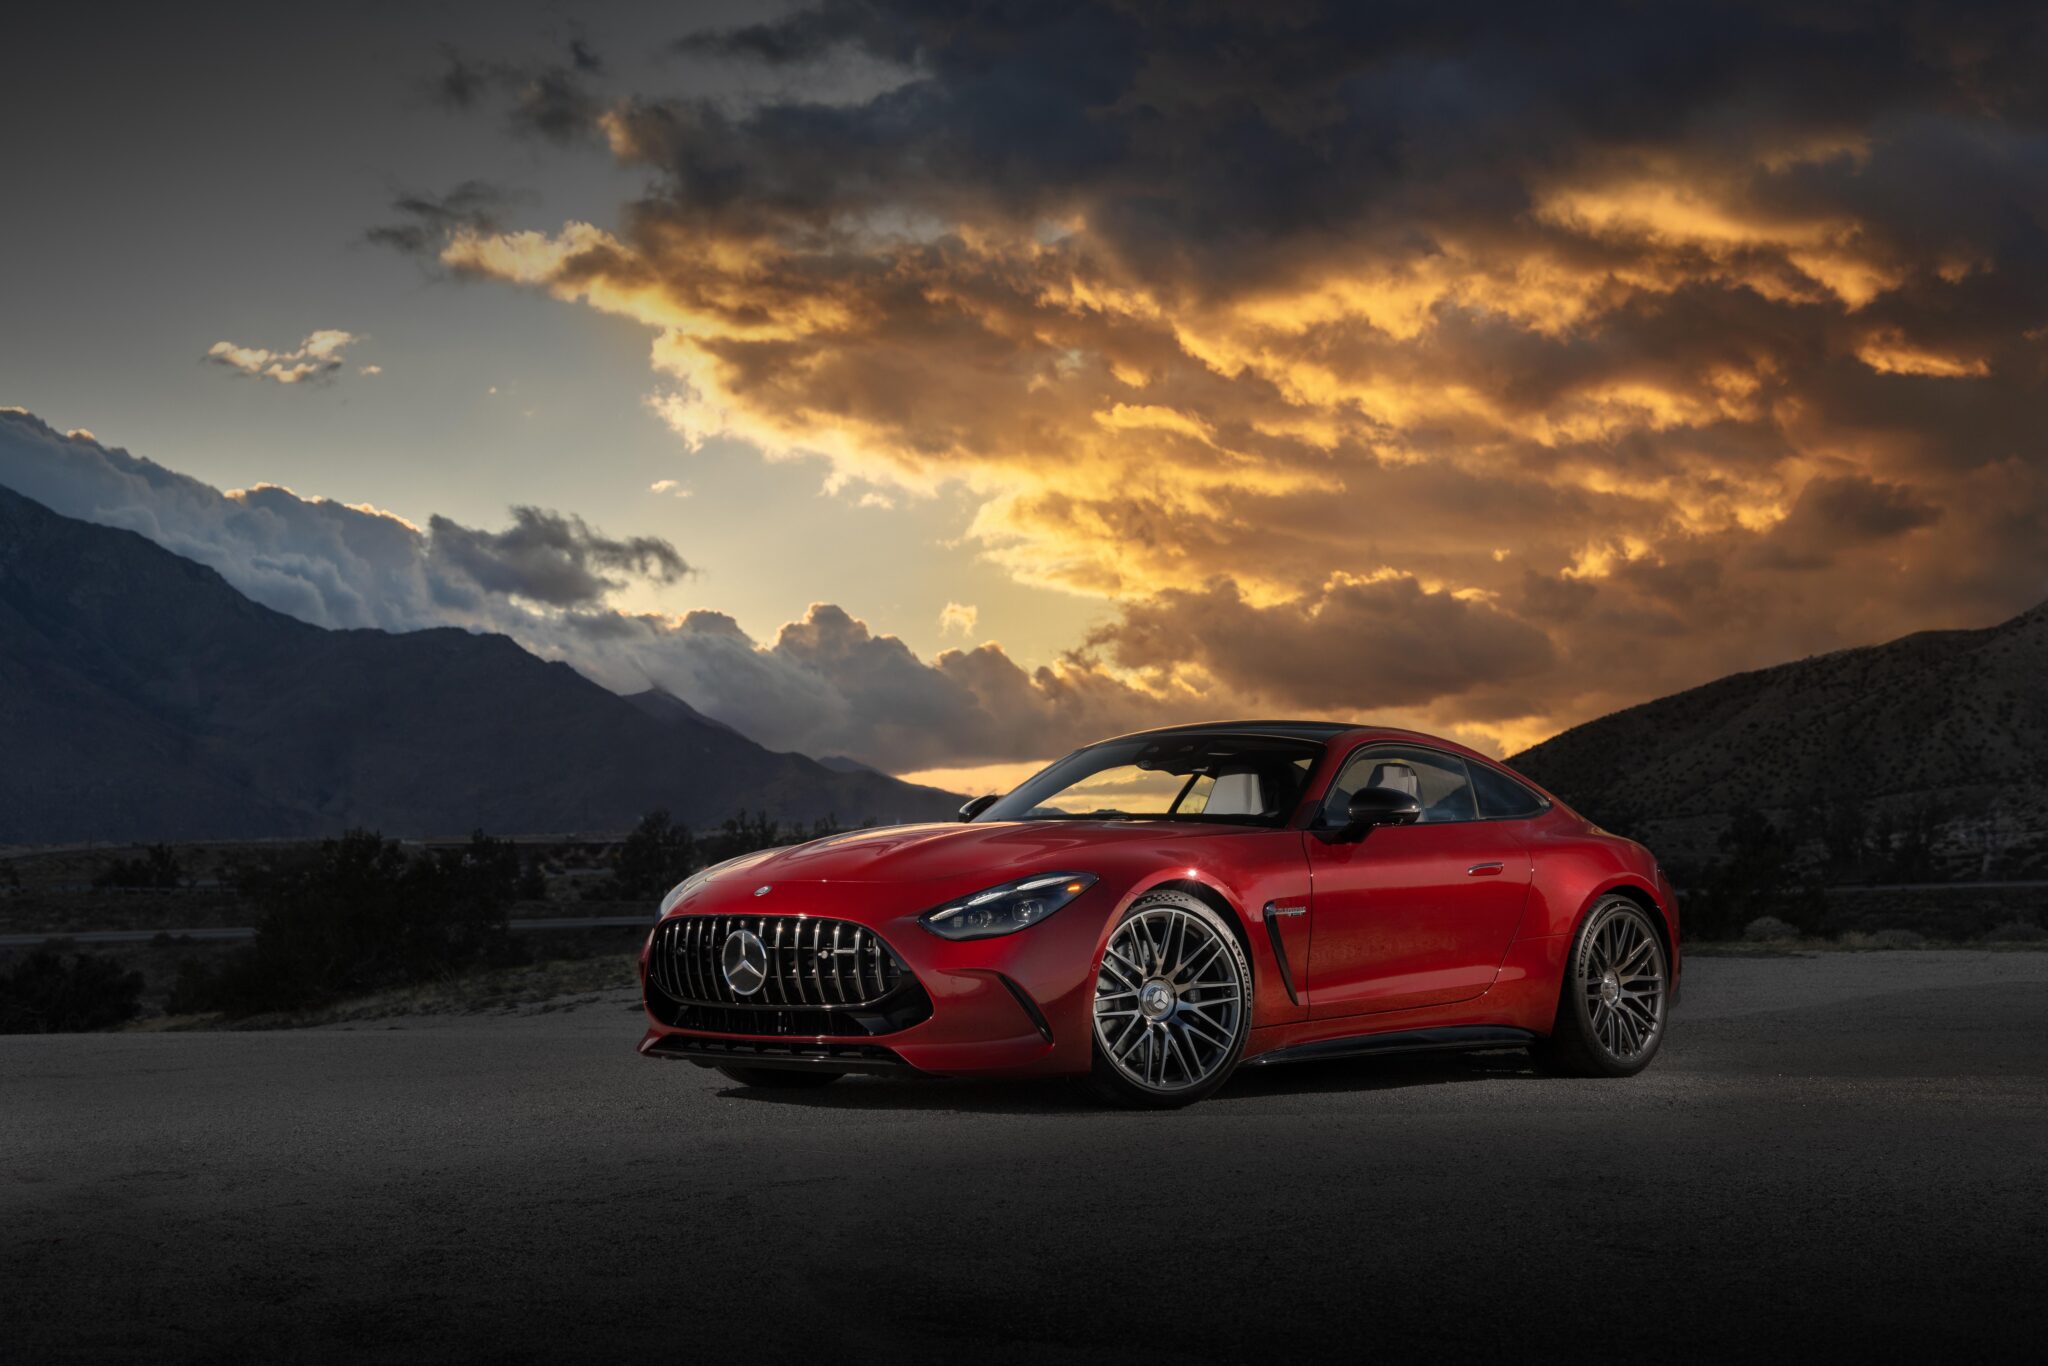 Mercedes Benz USA Announces Pricing for the all new Mercedes AMG